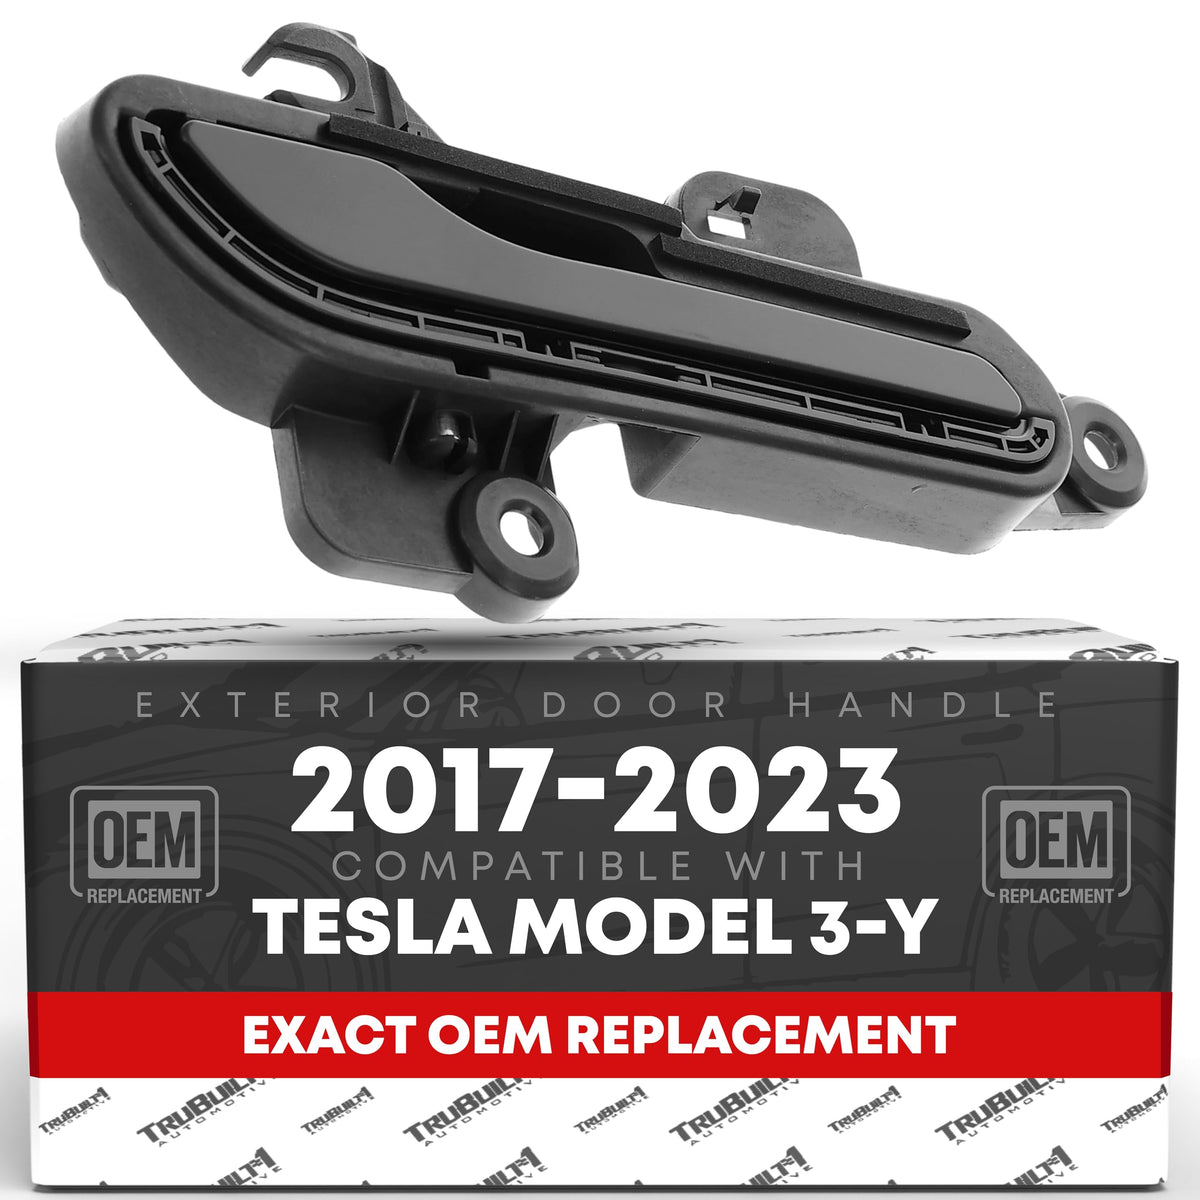 Exterior Front and Rear Passenger's side Door Handle Compatible with 2017-2022 Tesla Model 3, 2020 - 2023 Model Y - Smooth Black, OEM Replacement Part# 11081832-00-J, 1528115-00-B, 15758